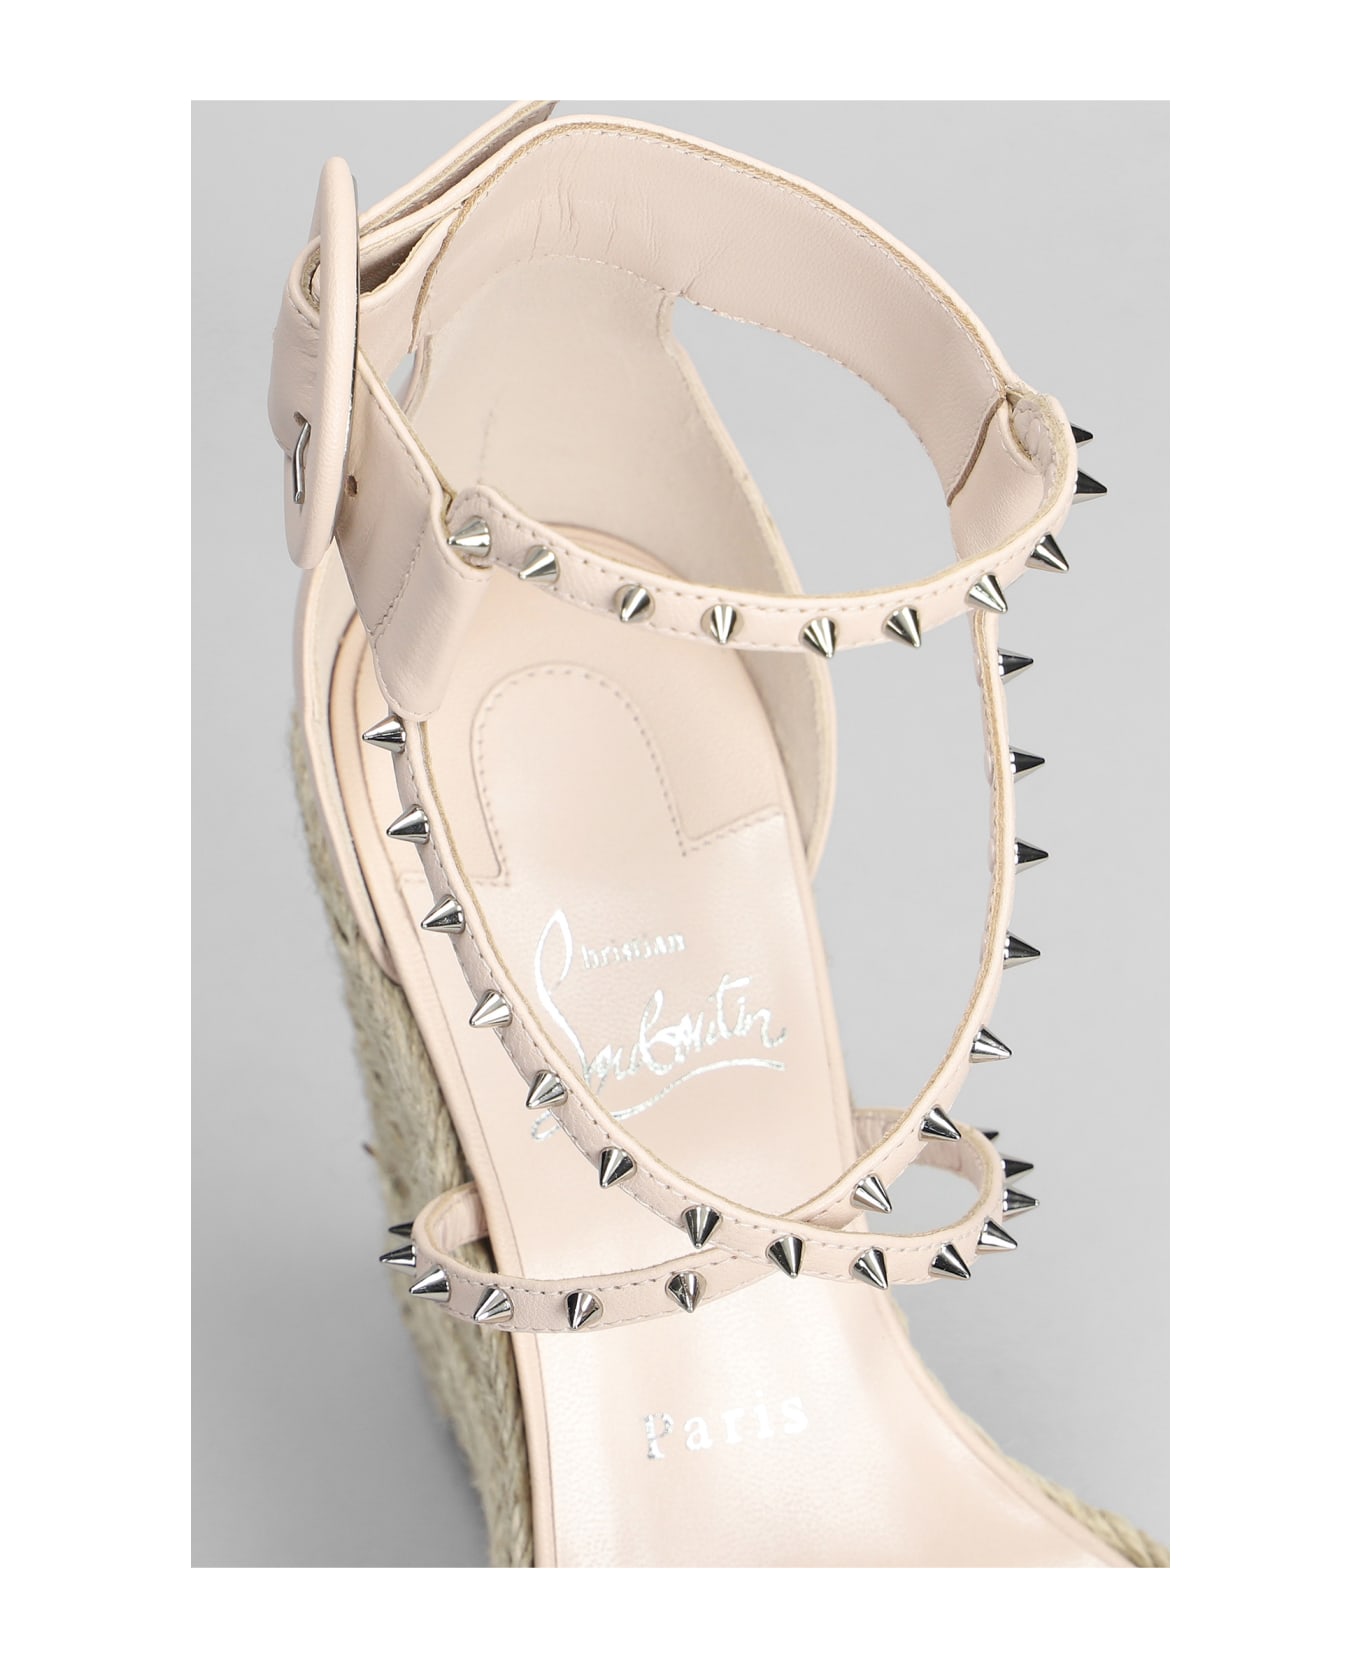 Christian Louboutin Spikes 120 Wedges In Rose-pink Leather - rose-pink サンダル